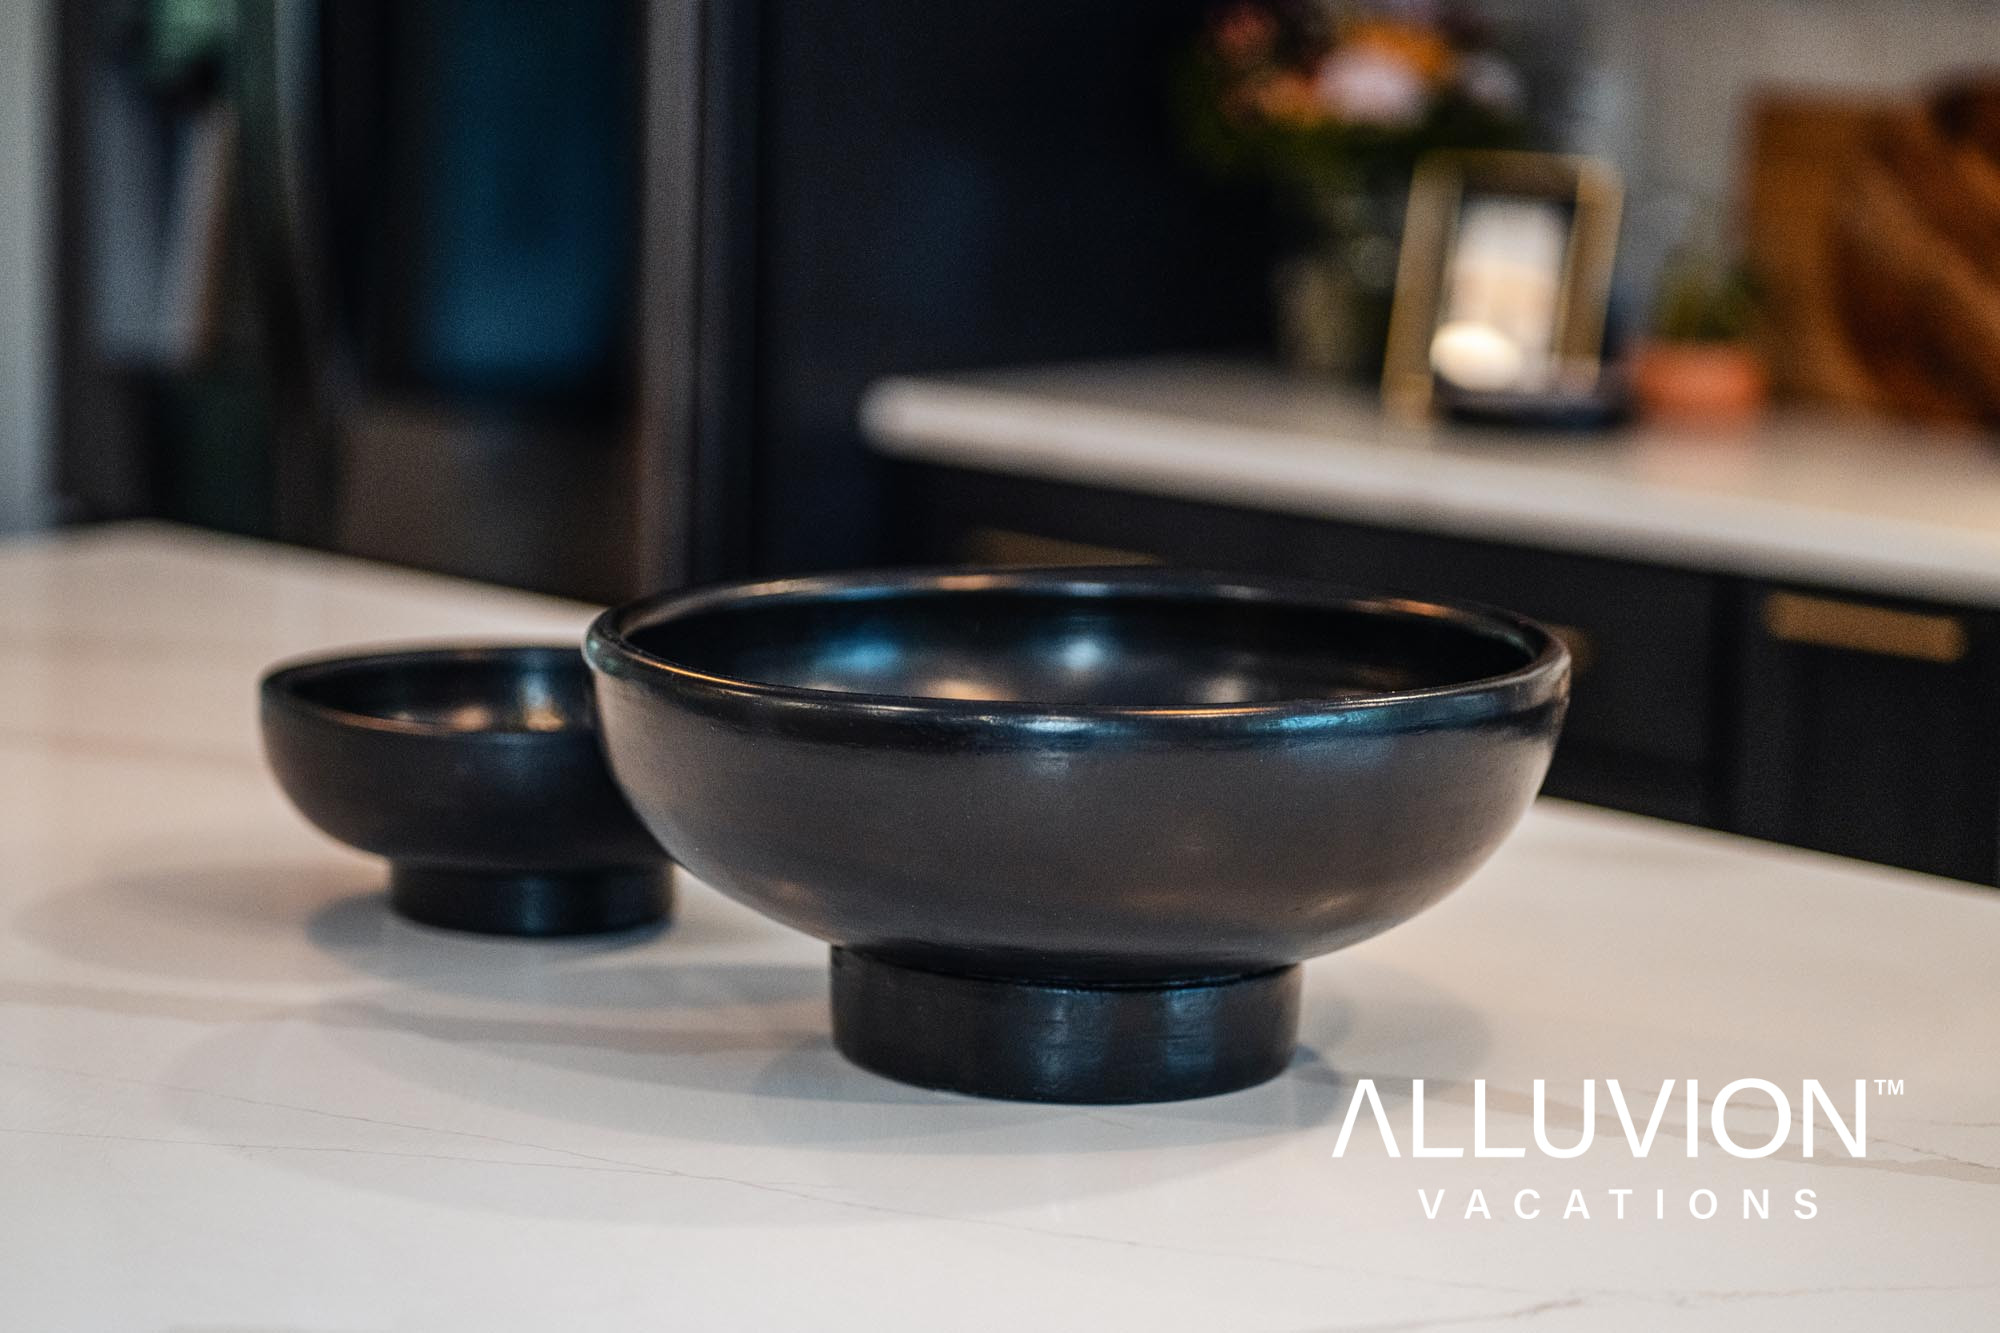 Discover Serenity in the Heart of Hudson Valley with Alluvion Vacations: Unwind at a Riverside Airbnb with a Hot Tub and Private Gym!